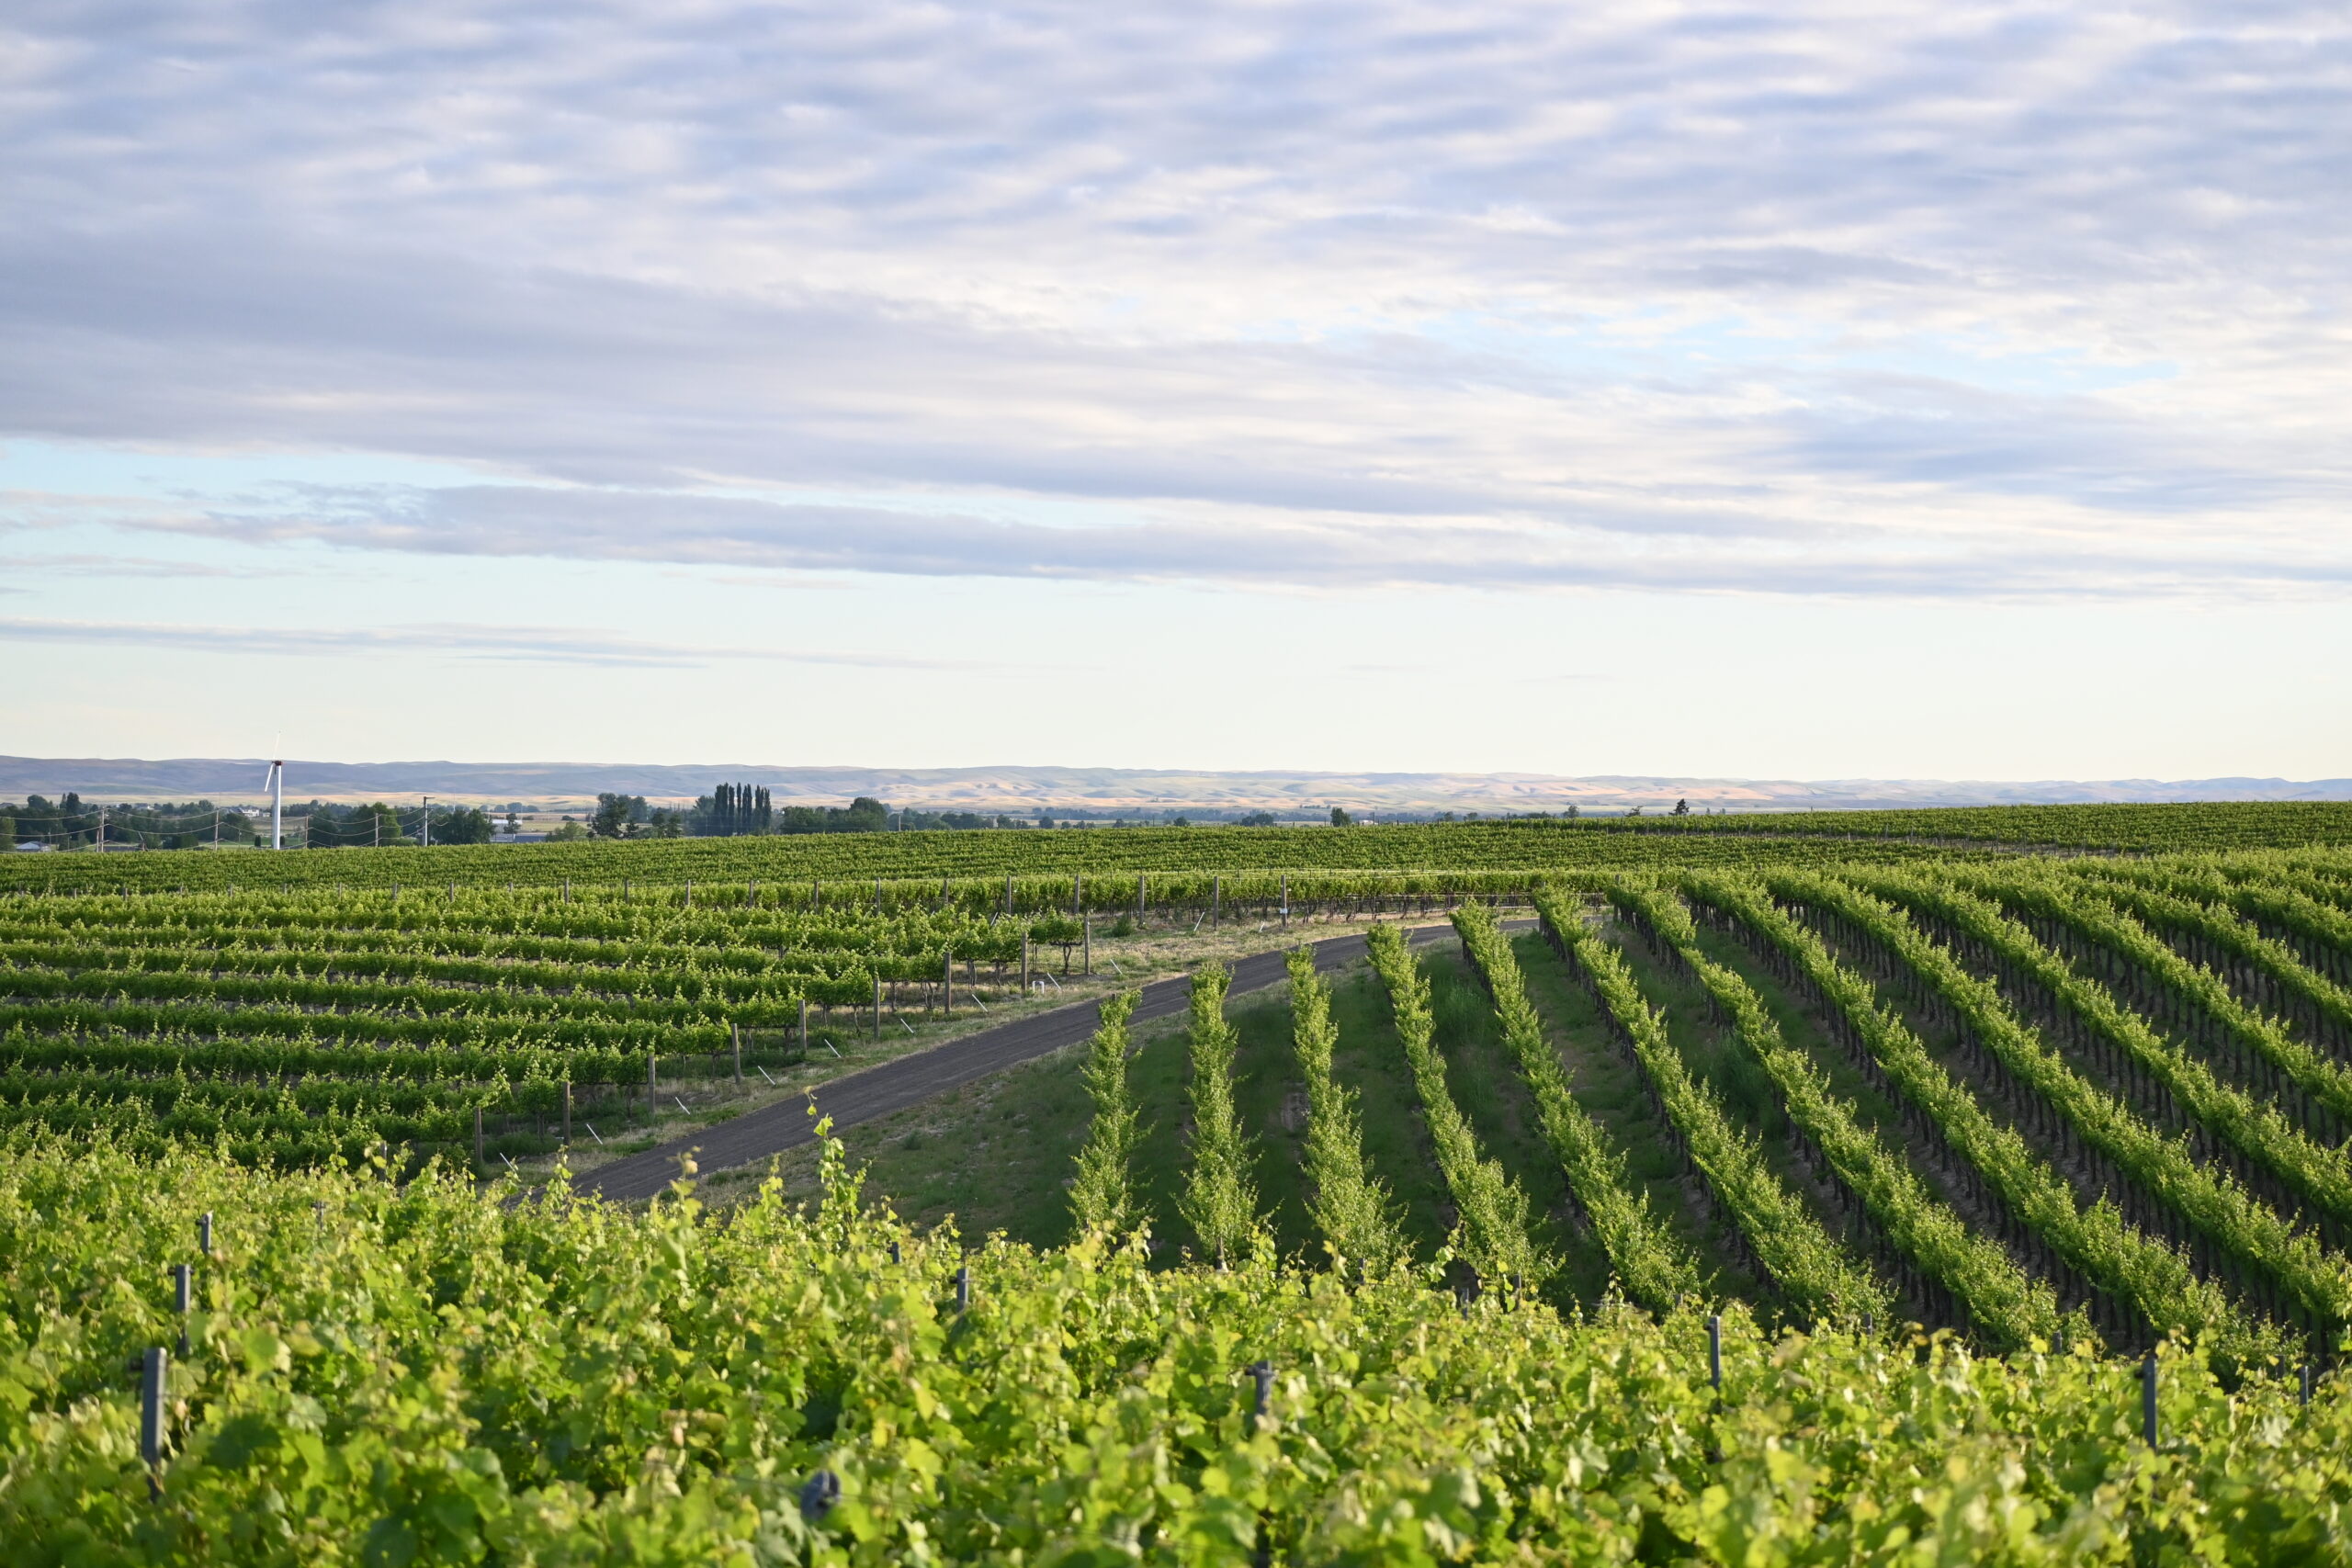 Rows of green grape vines in alternating directions, cut through by a road. Hills and trees are in the distance and the sky above is light blue.